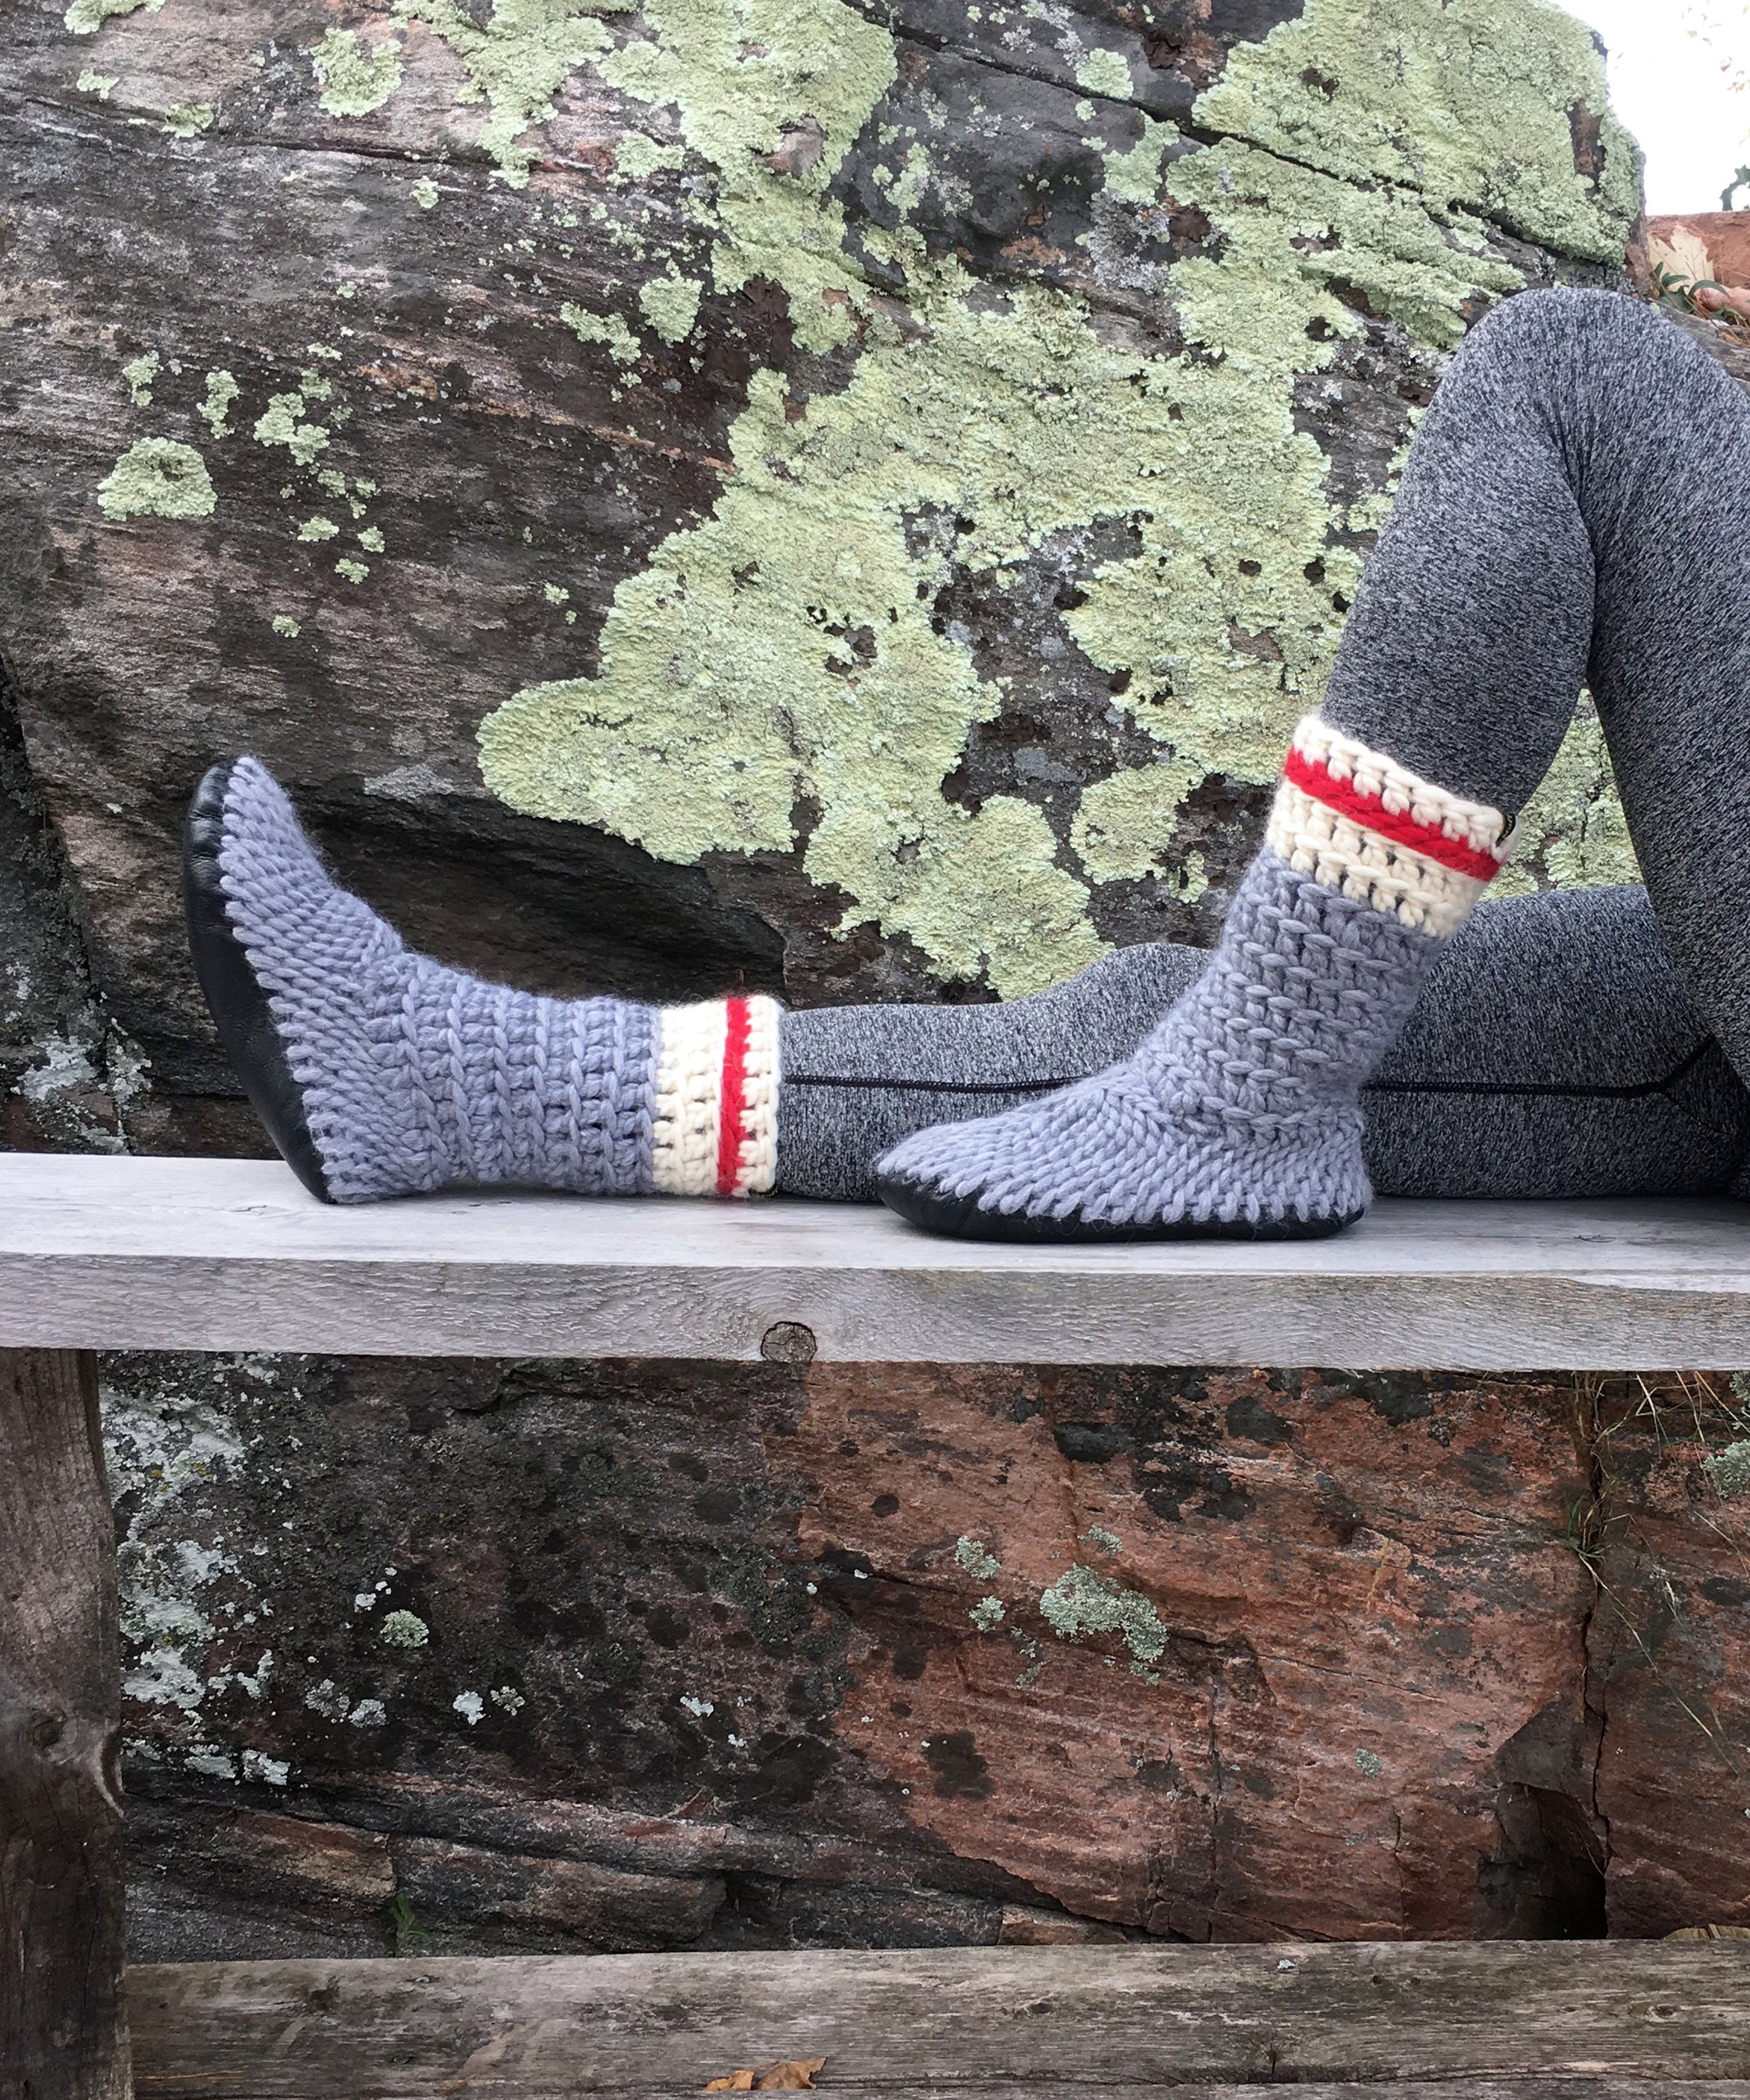 Merino Wool Crochet Slippers for Women, Durable Slippers with Leather Soles, Handmade in Canada